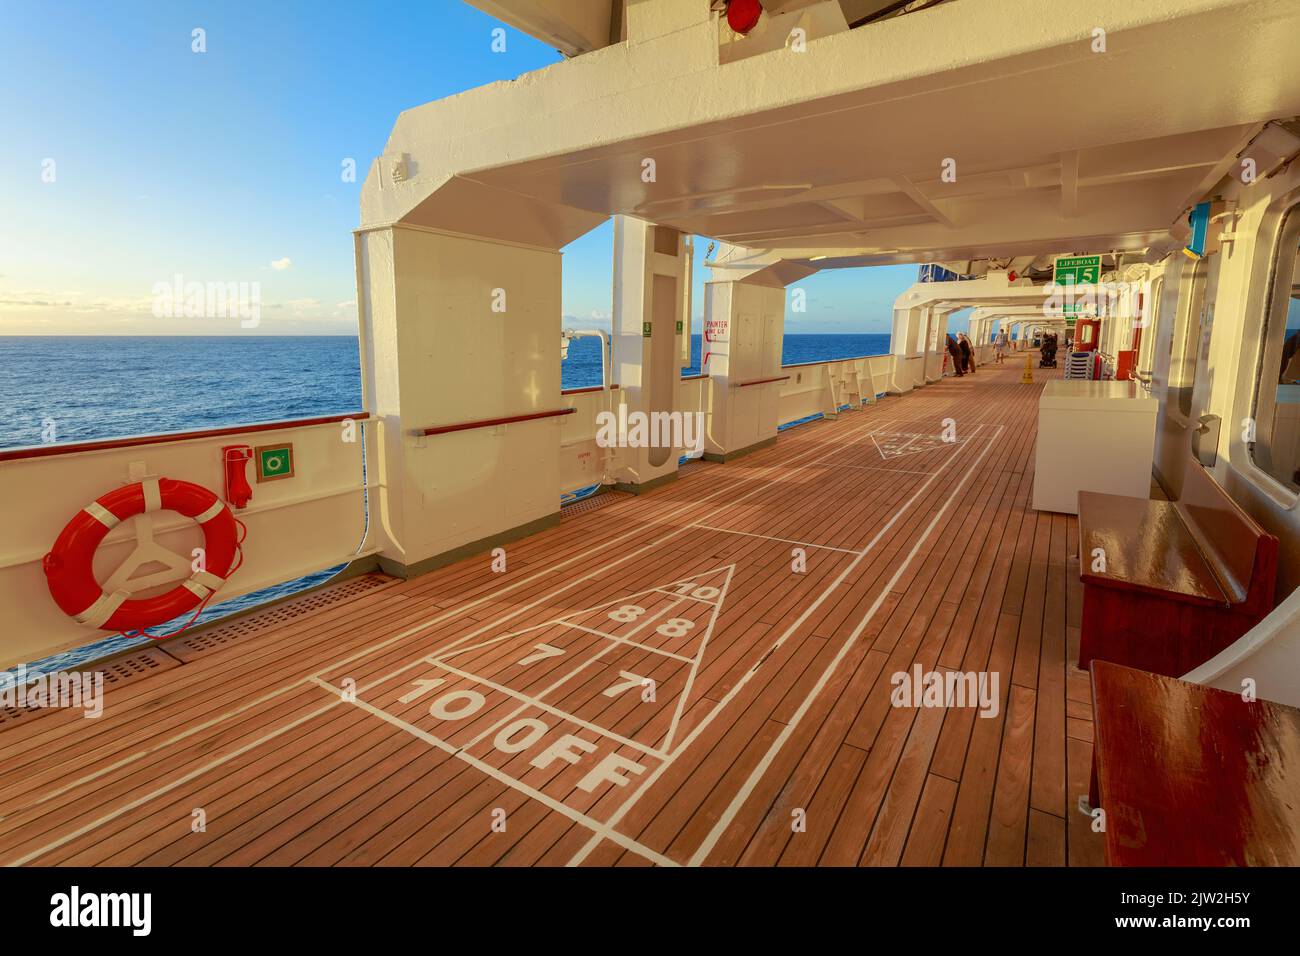 A shuffleboard court on the deck of a cruise ship Stock Photo